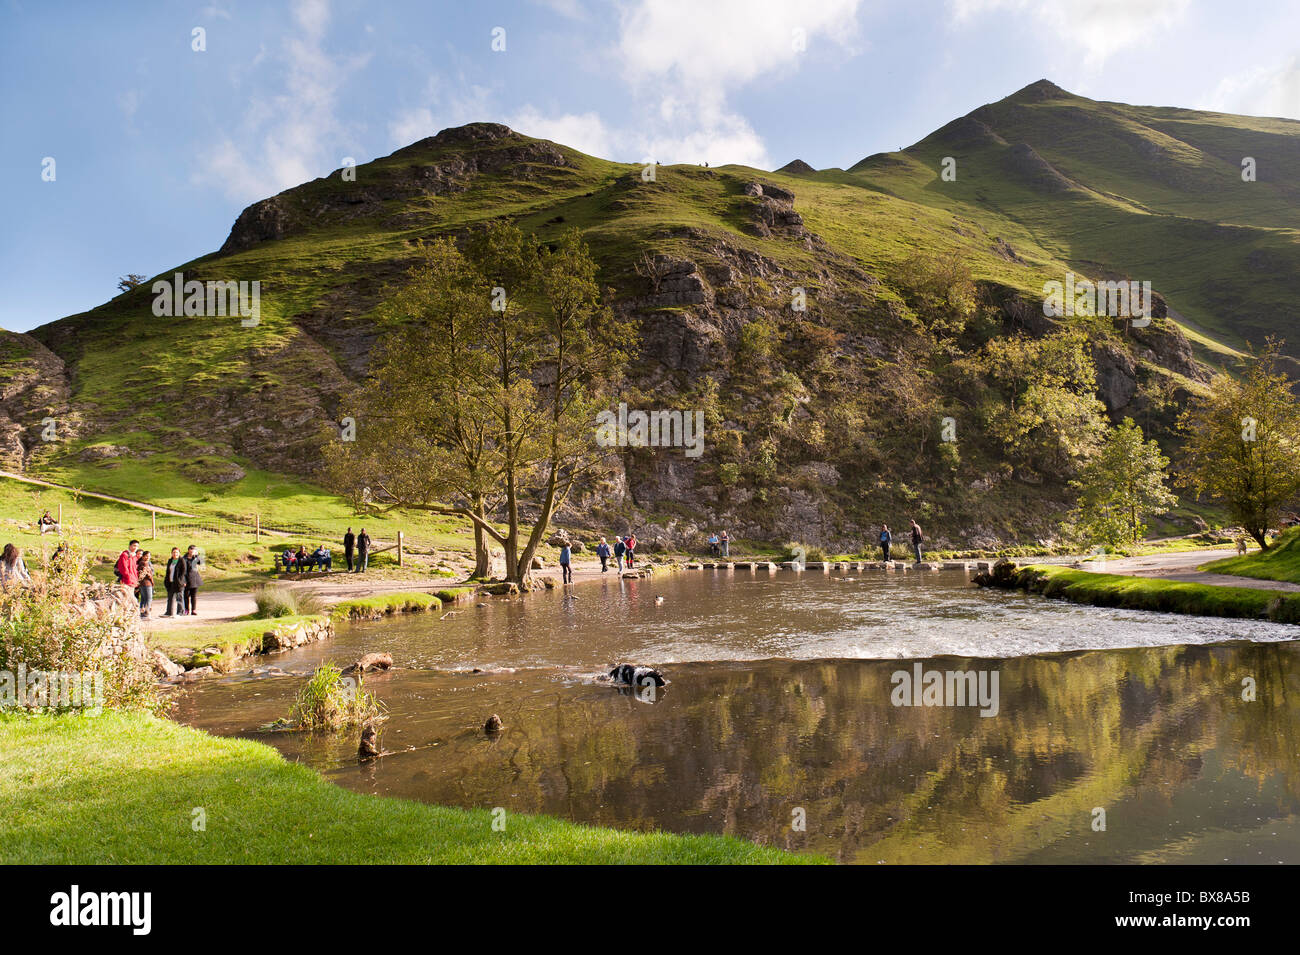 Dovedale in the Peak District, Derbyshire, England is a wonderful area for walking. The well known stepping stones are shown. Stock Photo